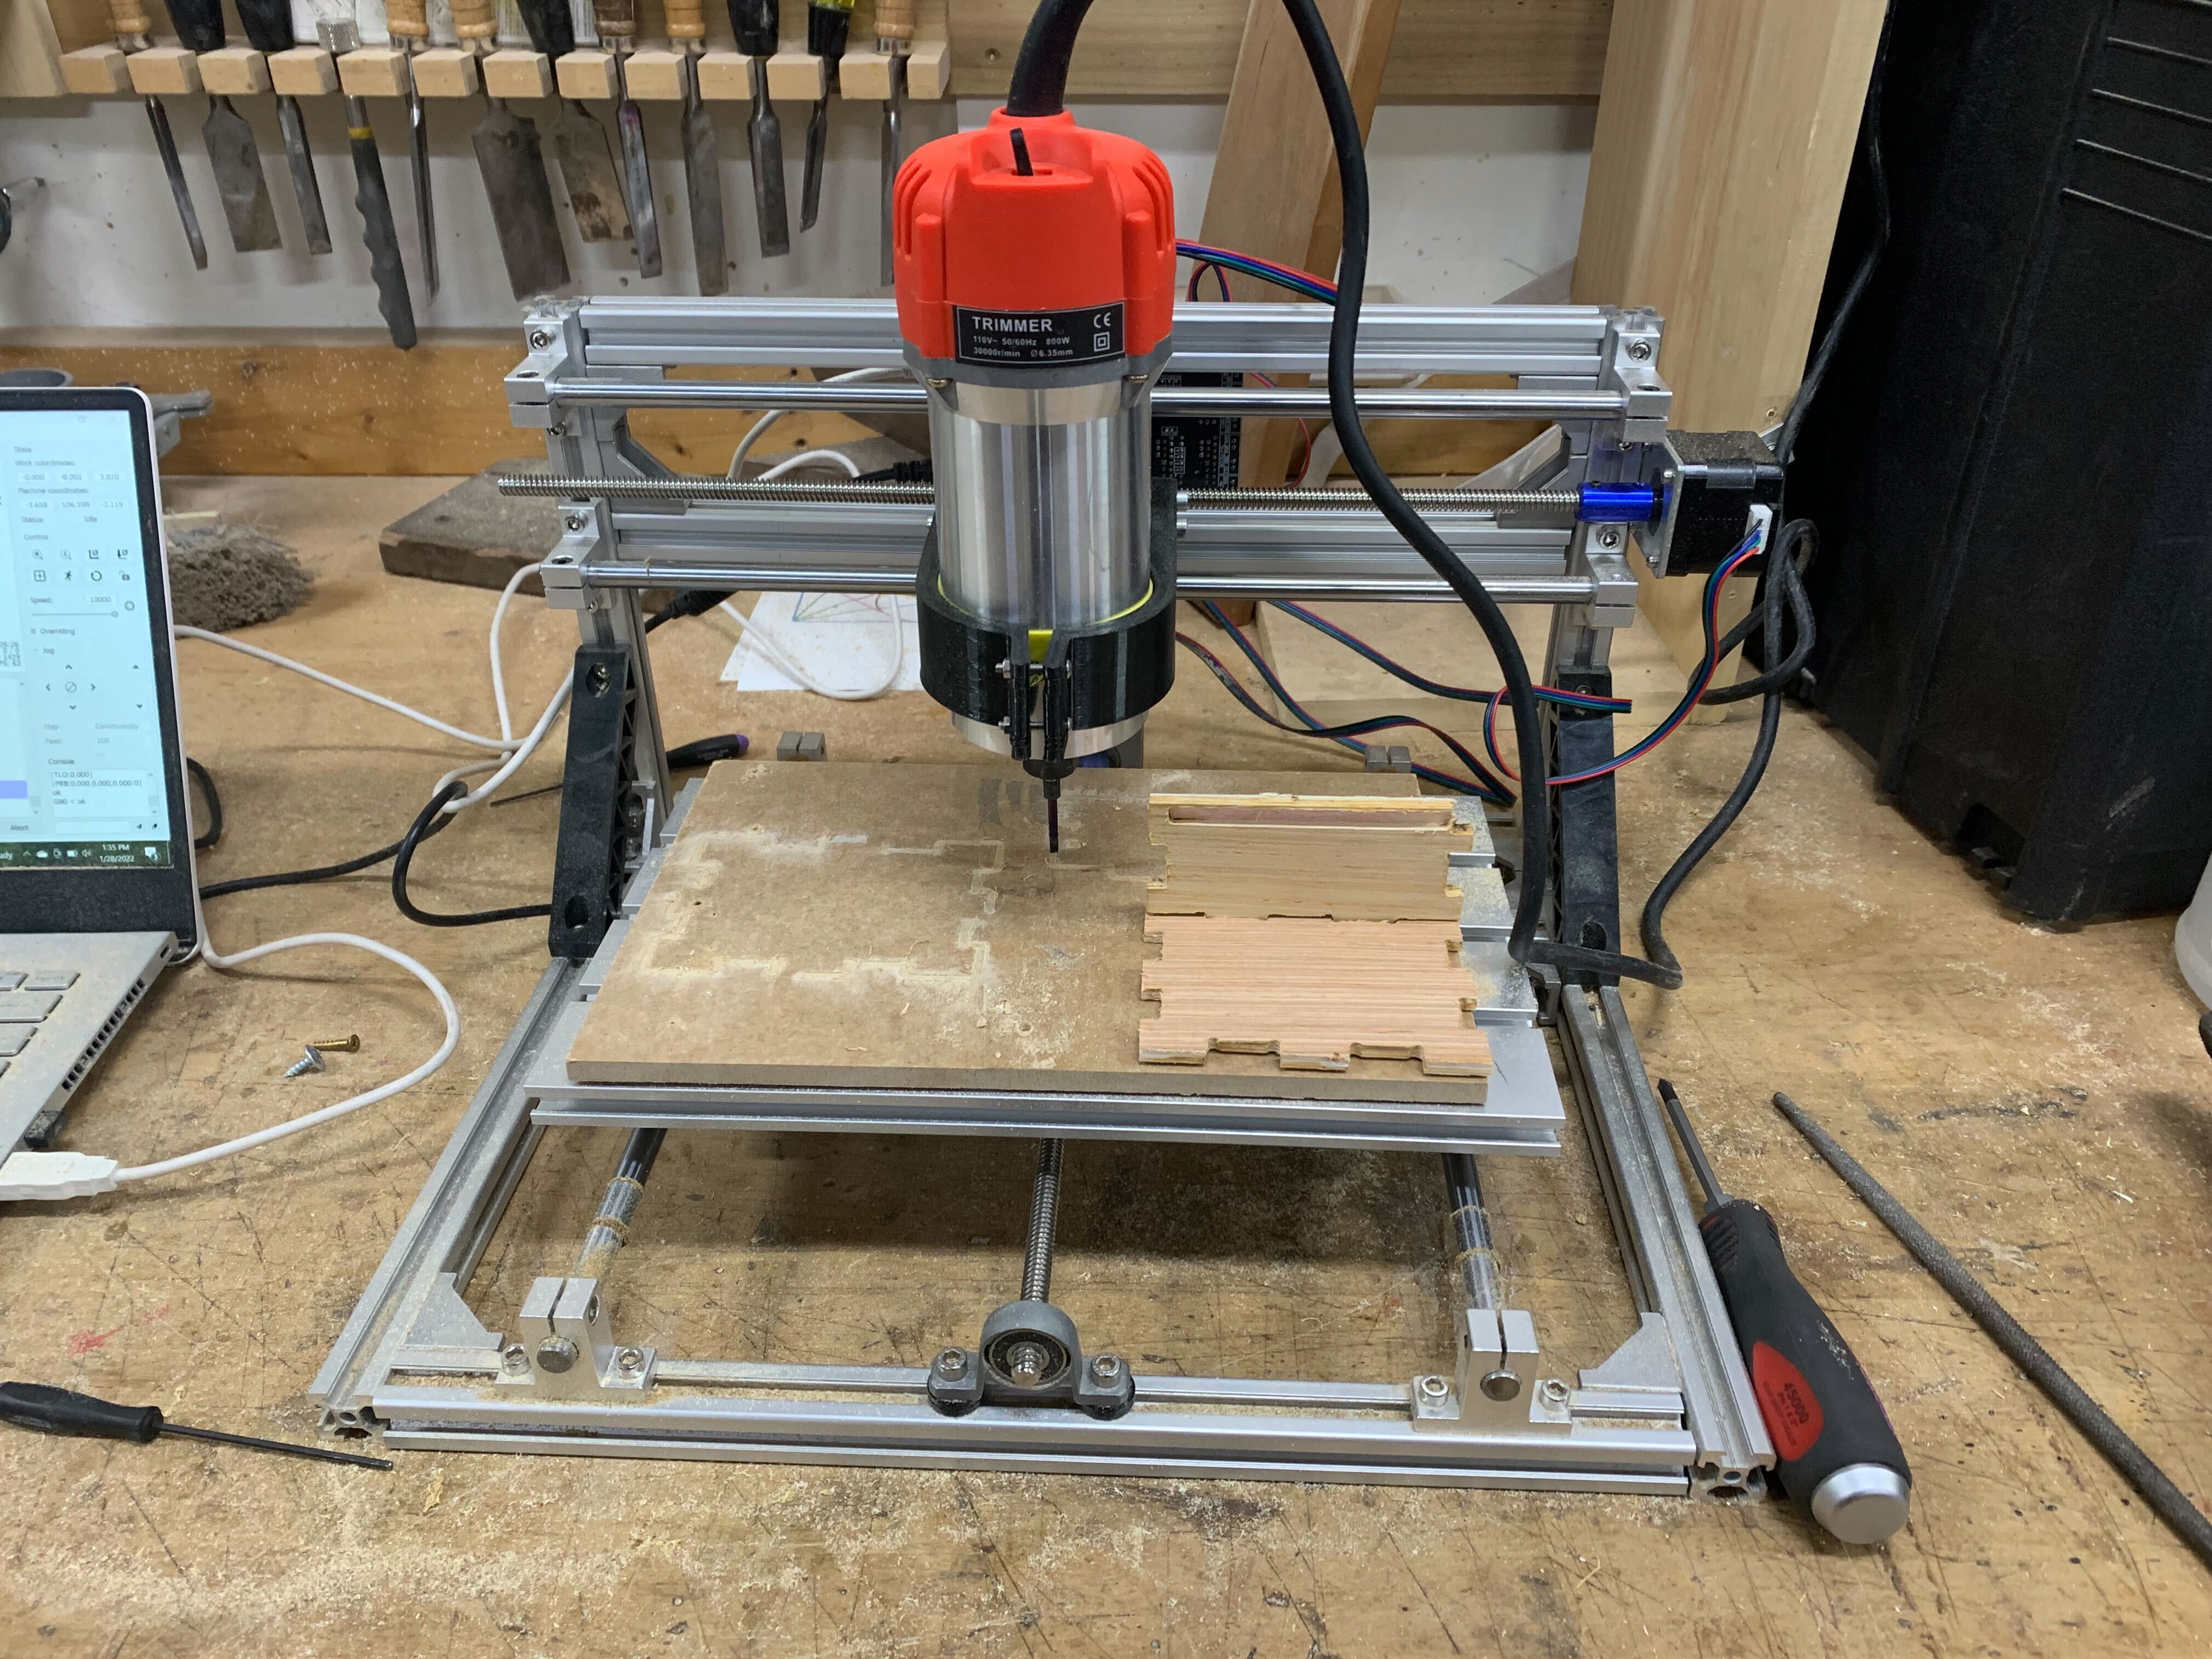 3D Printed 3018 CNC Spindle Holder for Wood Router